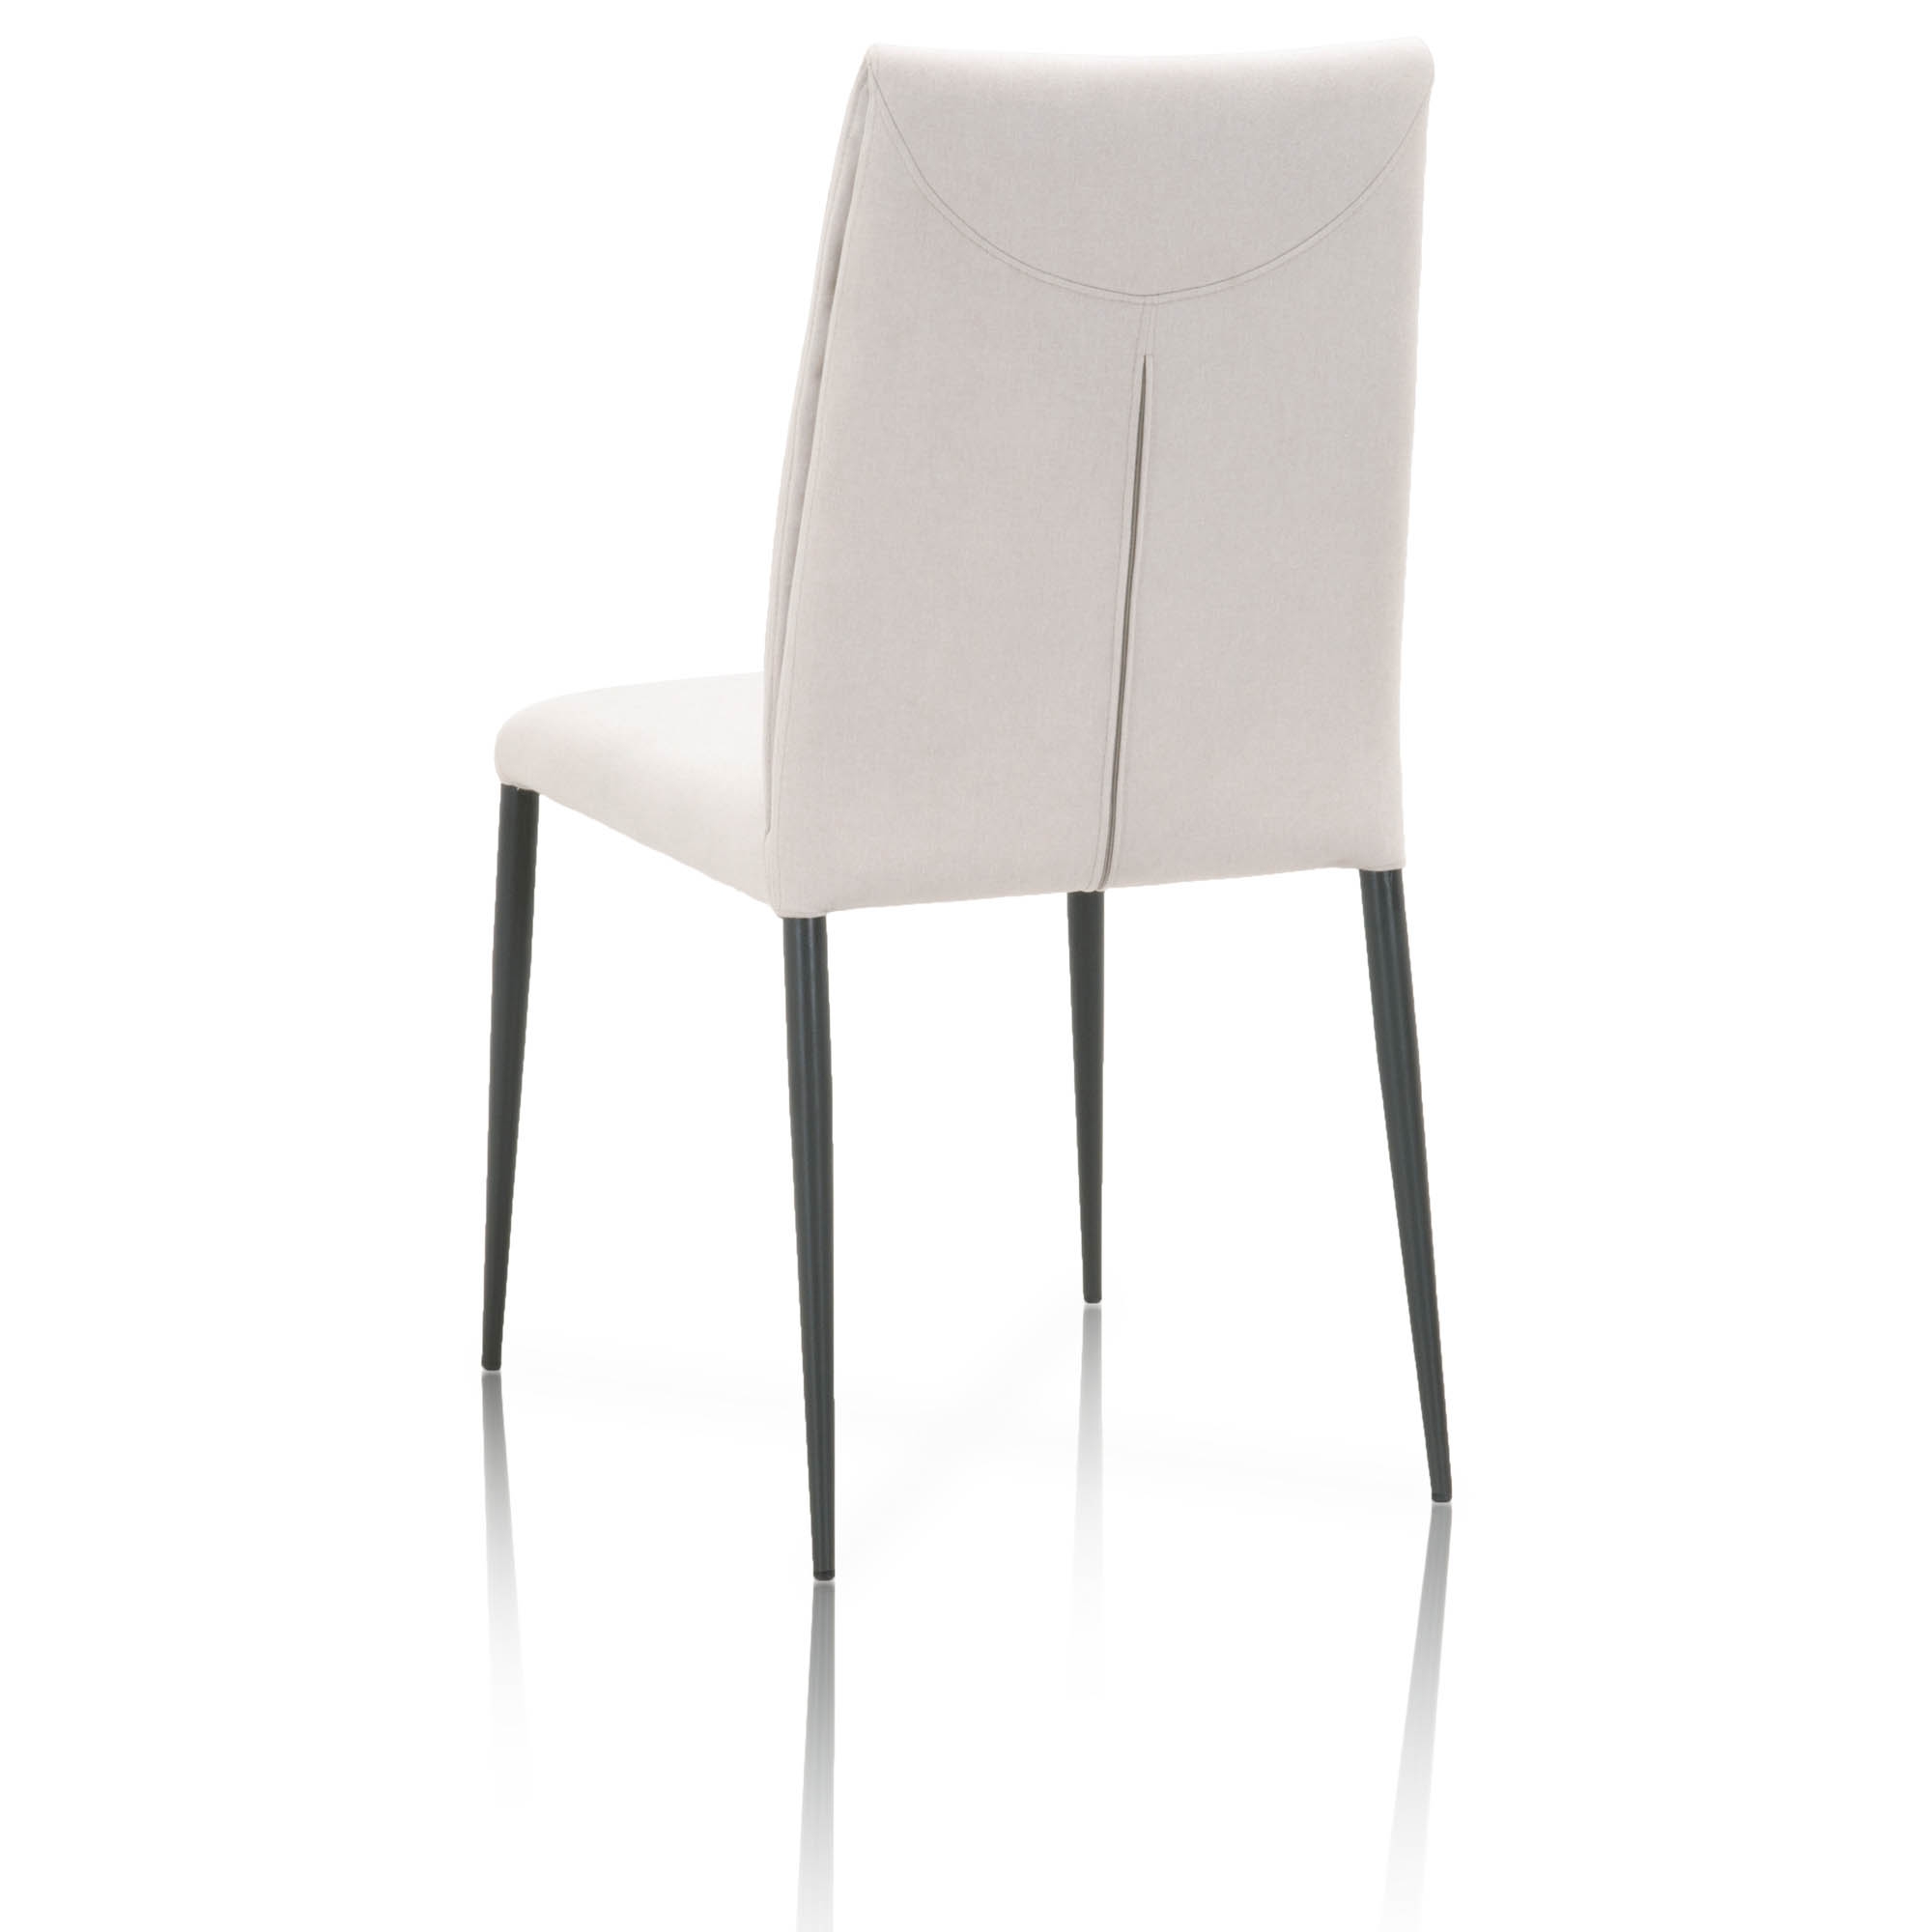 Drai Dining Chair, Clay & Gray, Set of 2 - Image 3